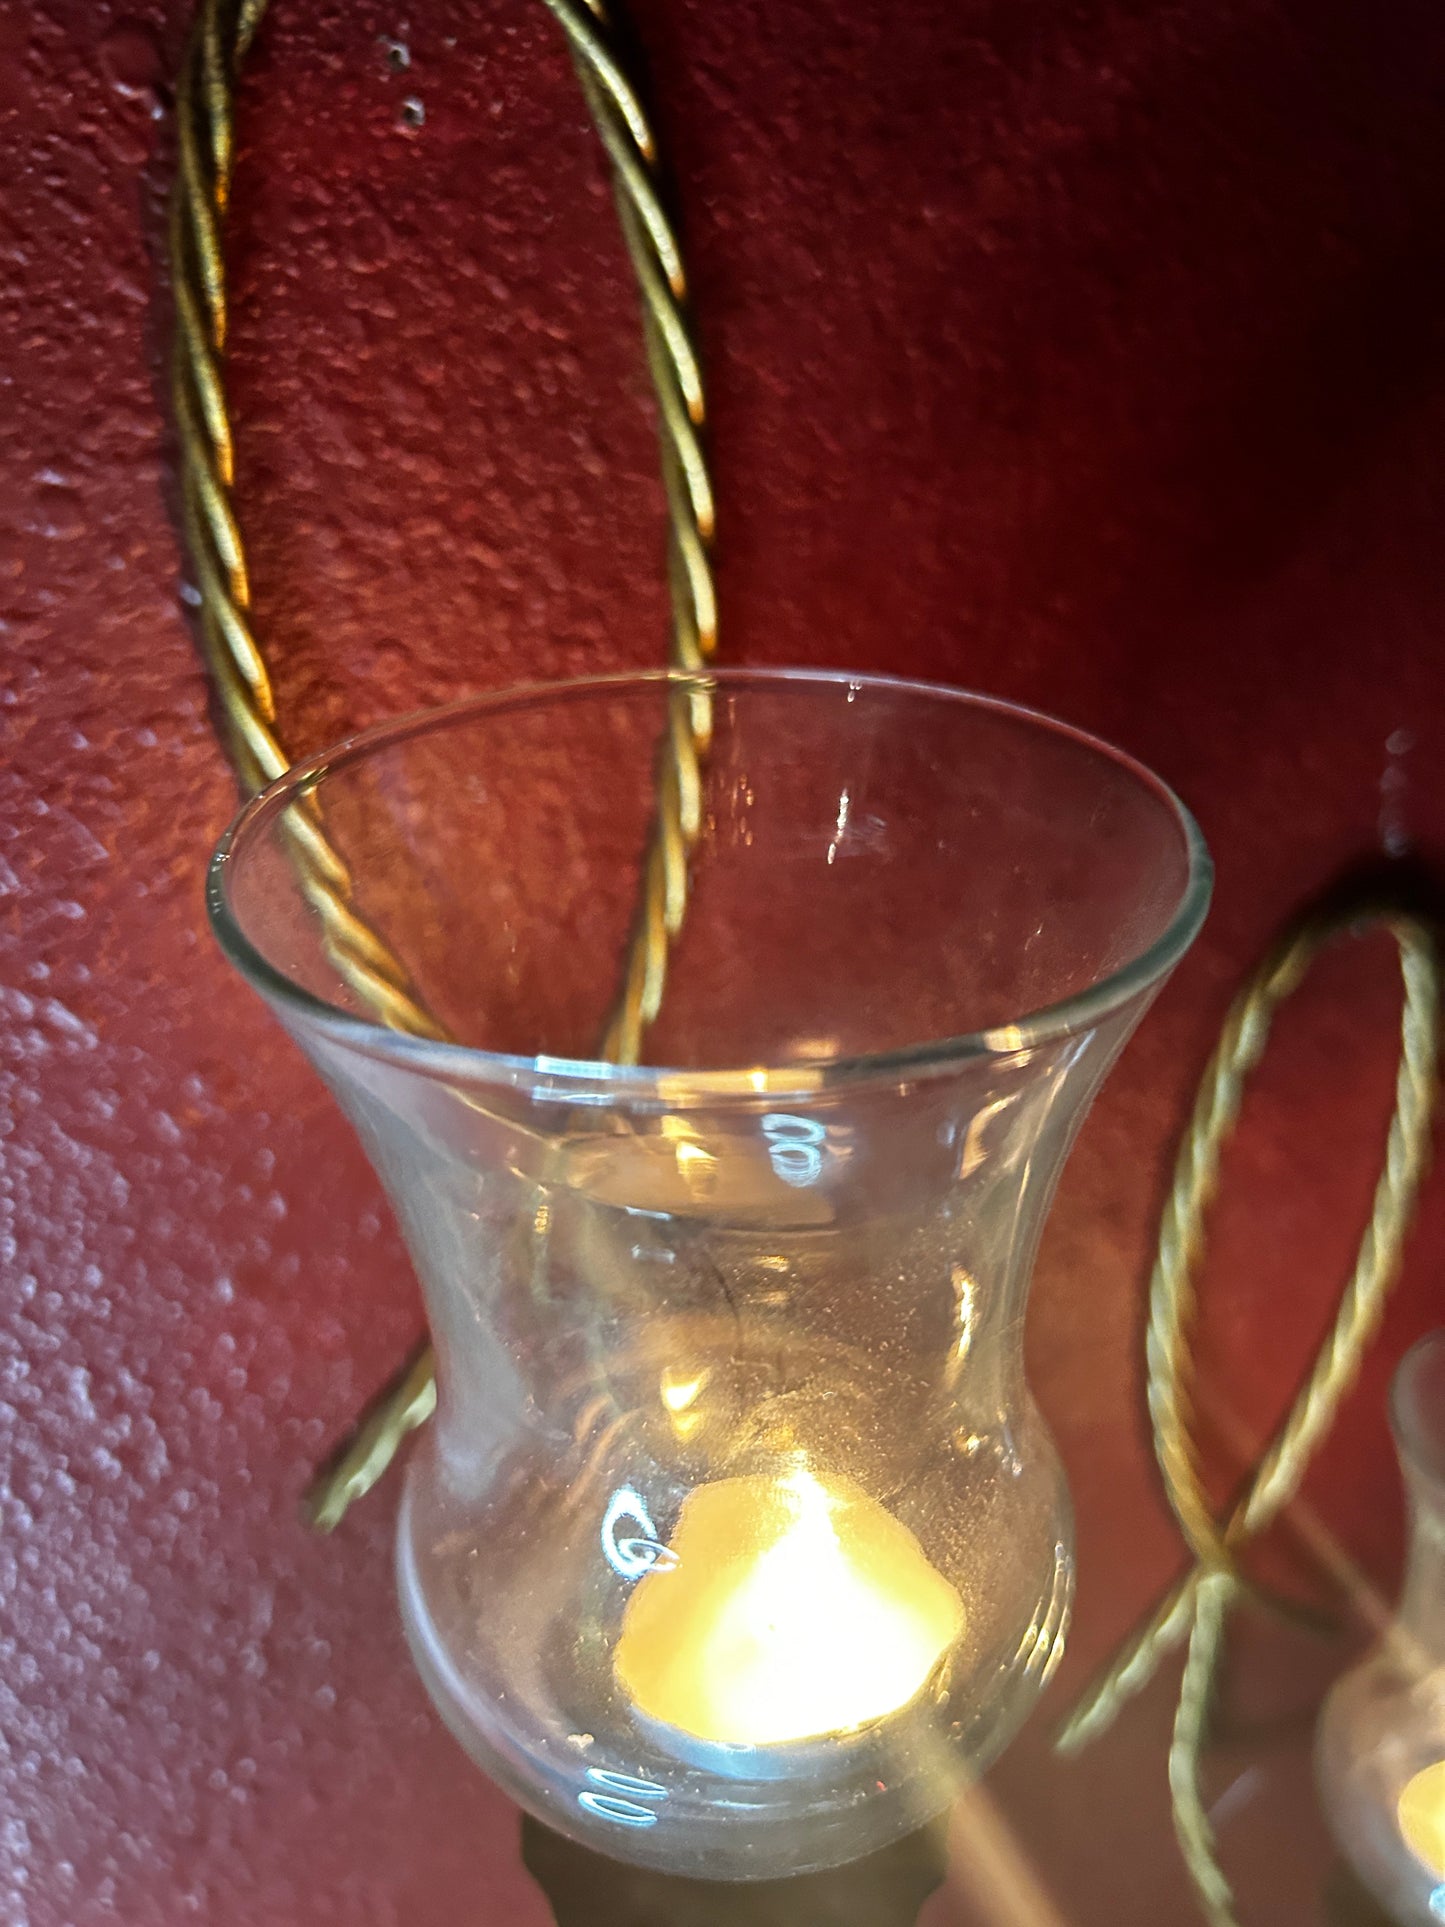 Pair of Twisted Metal Candleholders with Glass Votives